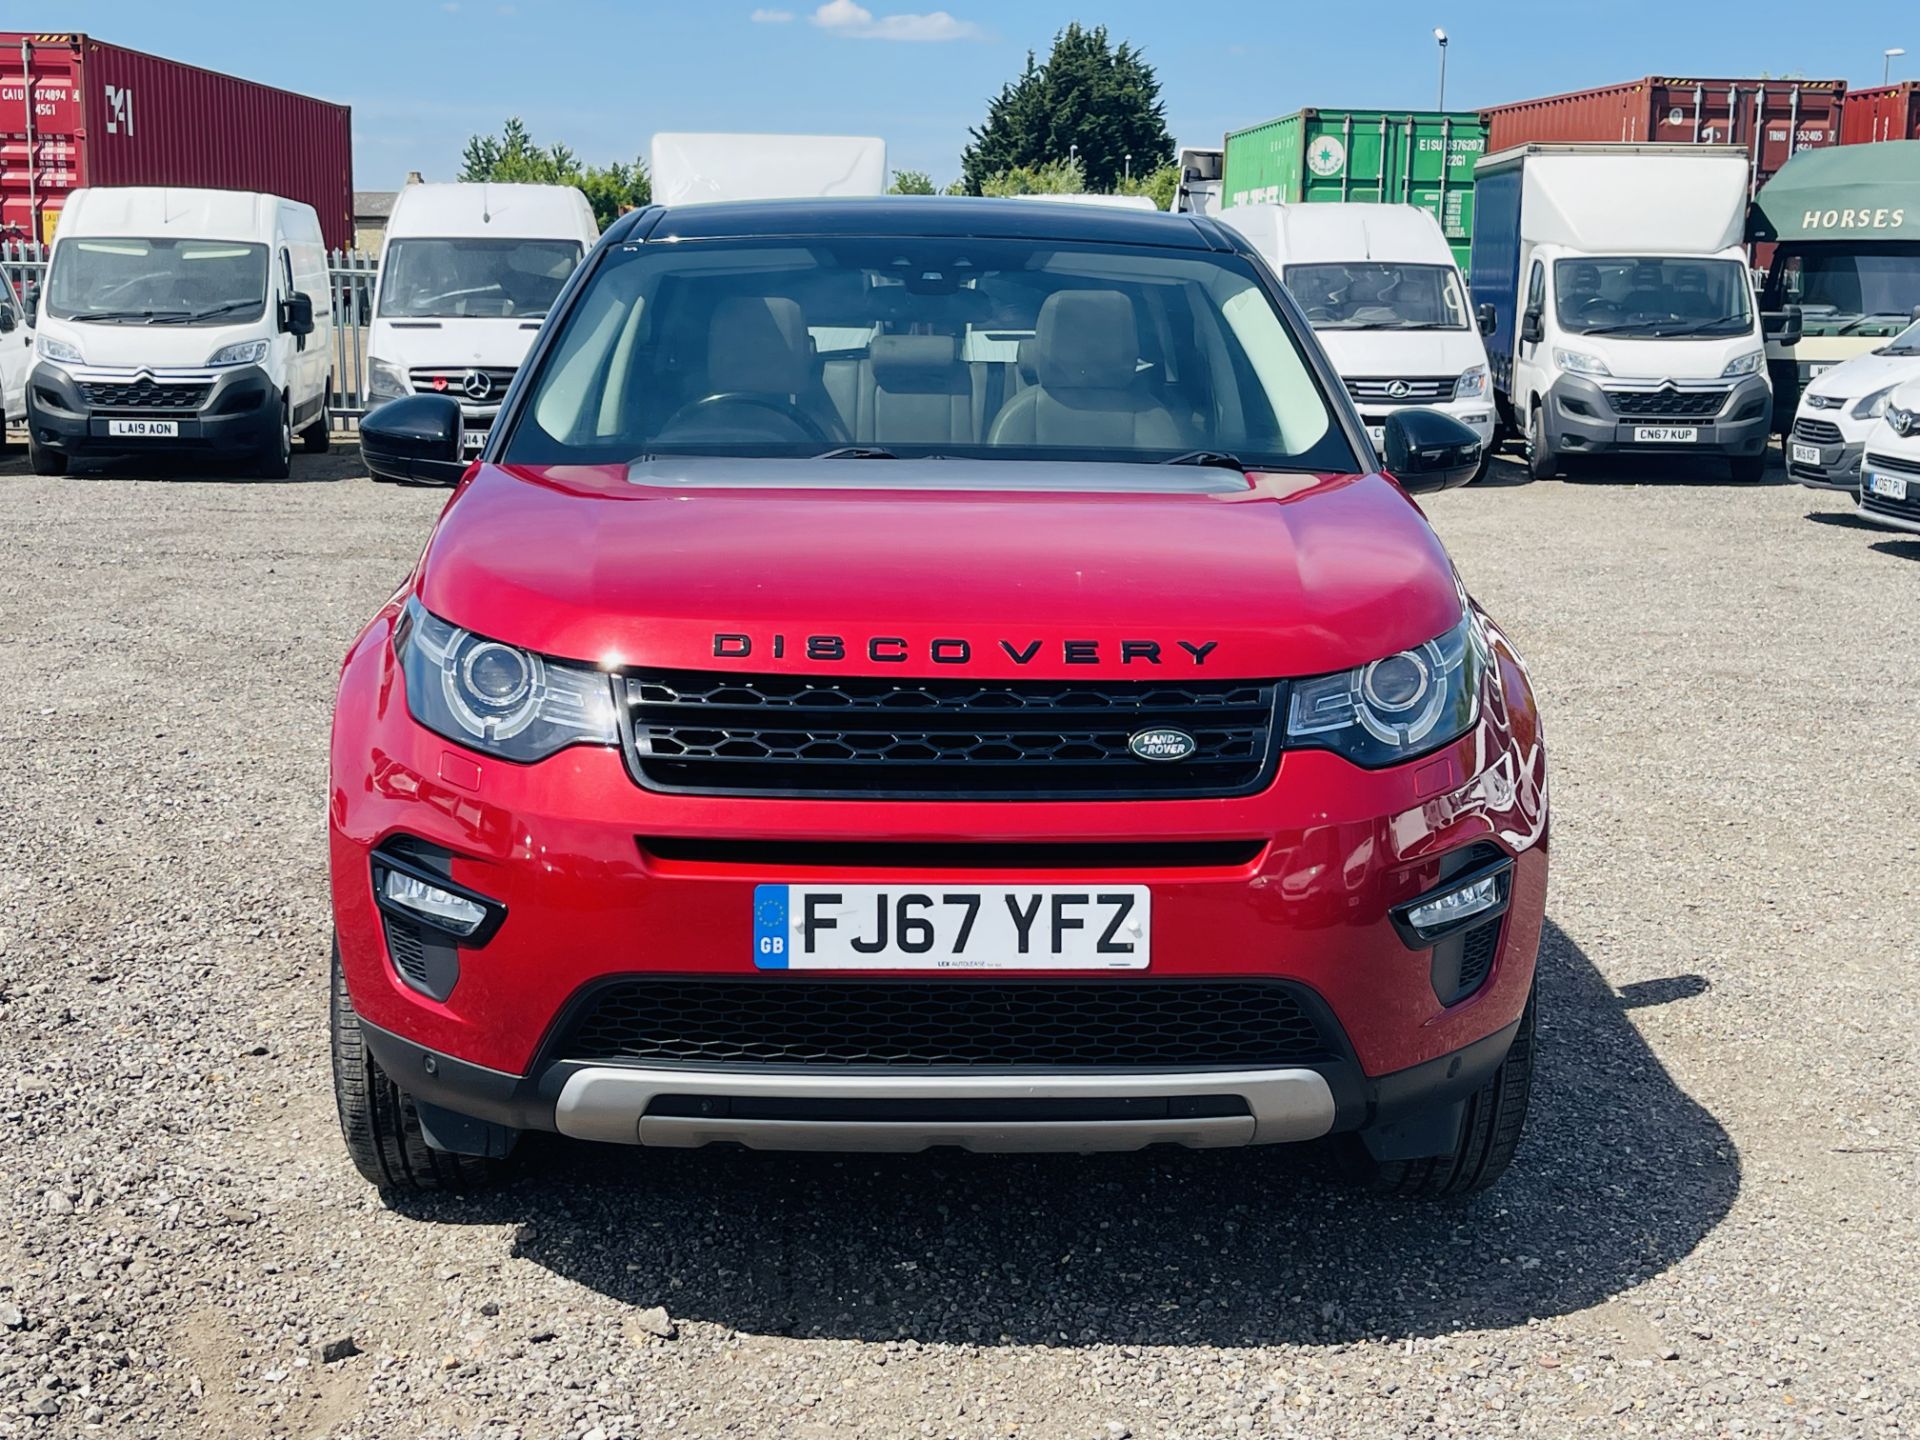 Land Rover Discovery Sport HSE 2.0 ED4 2017 '67 Reg' Sat Nav - Panoramic Glass Roof - ULEZ Compliant - Image 3 of 33